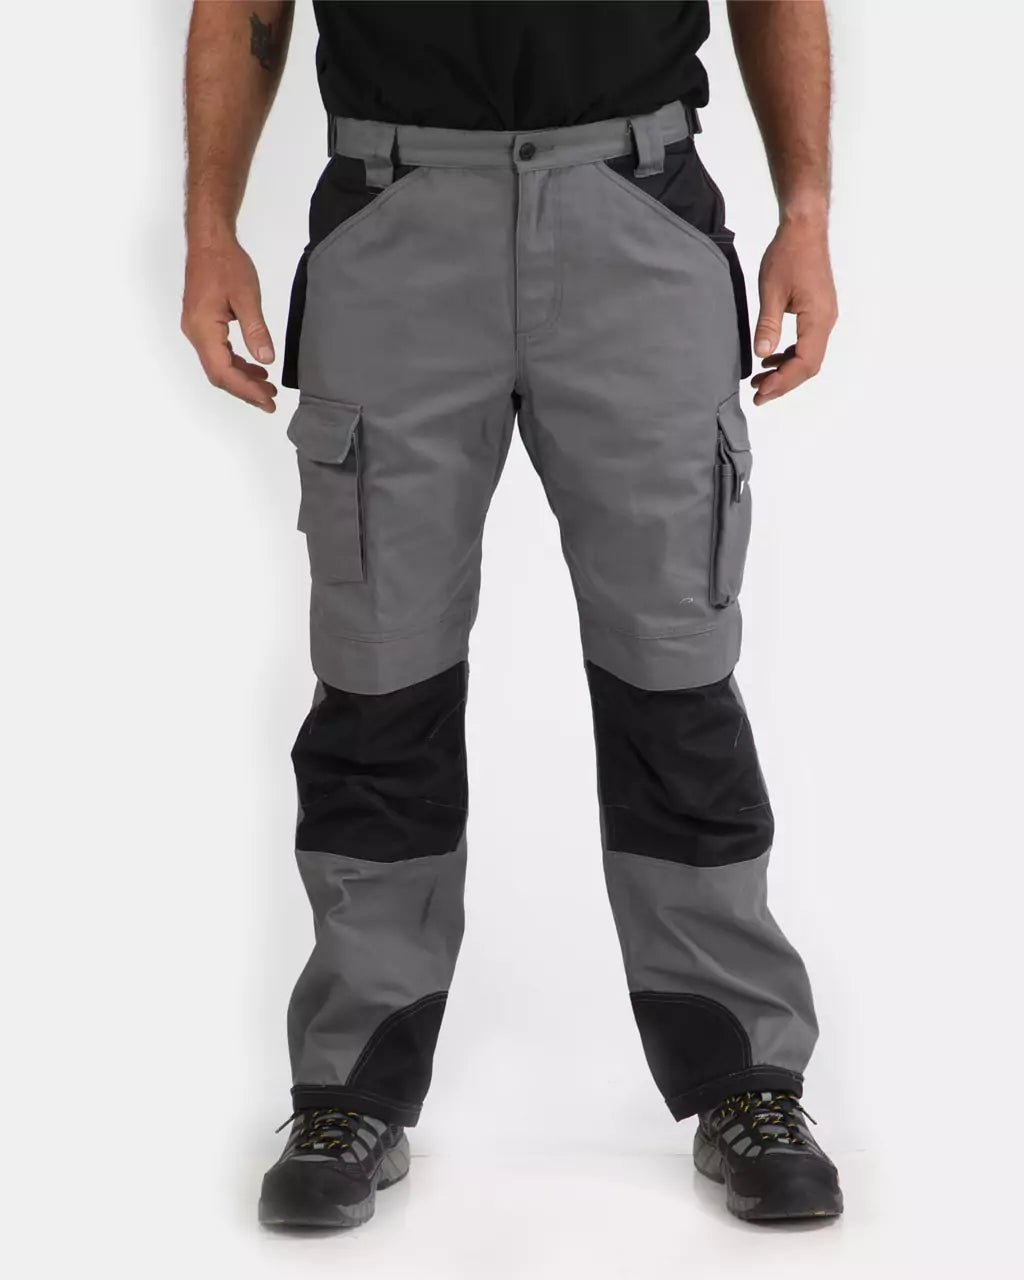 PRODUCT REVIEW: Caterpillar Trademark Trouser Work Pants — Dave's New York